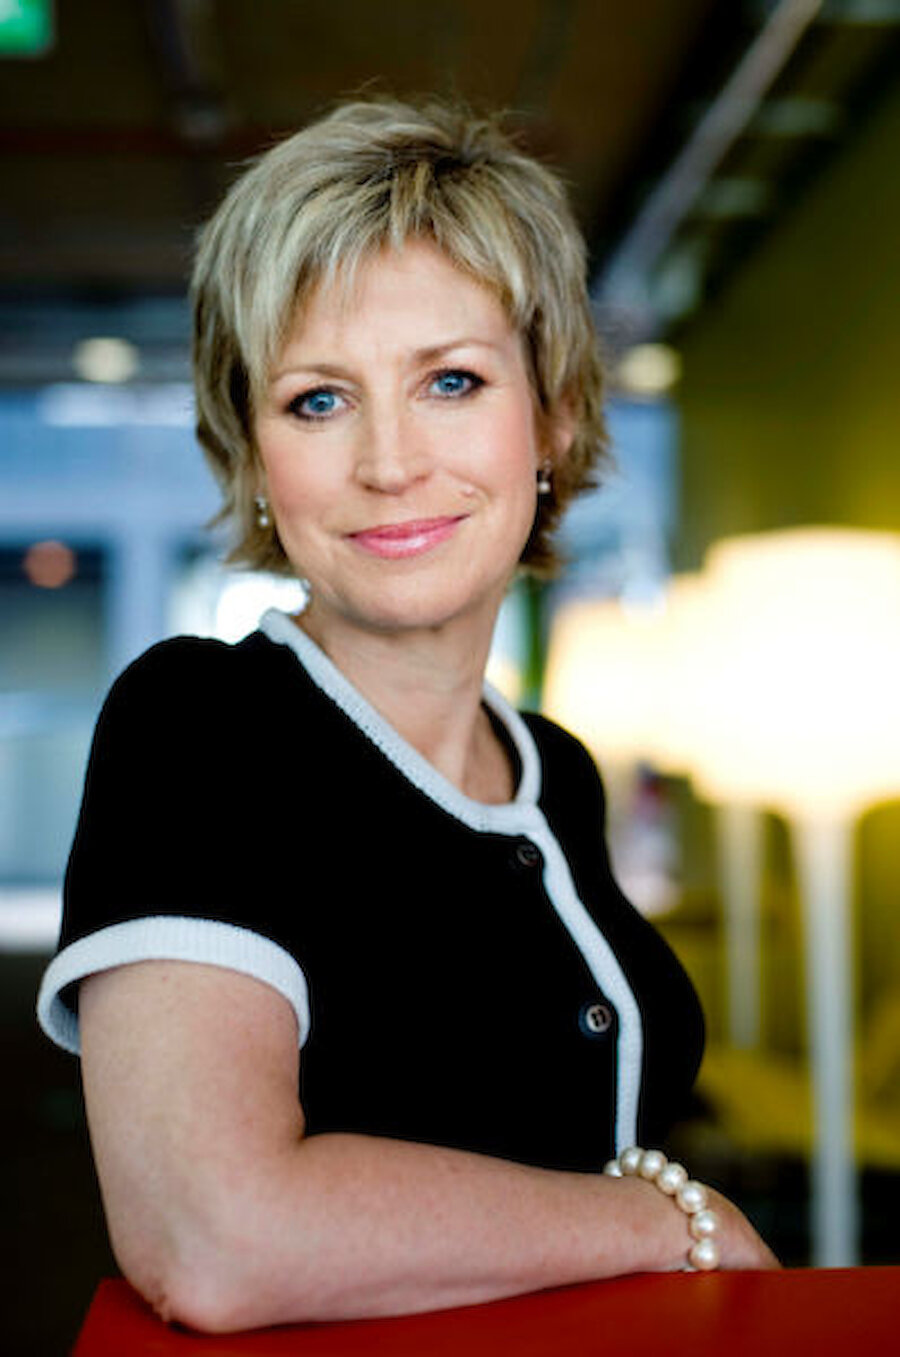 Sally Magnusson's book movingly recounts the impact of dementia. (Courtesy Shetland Arts)